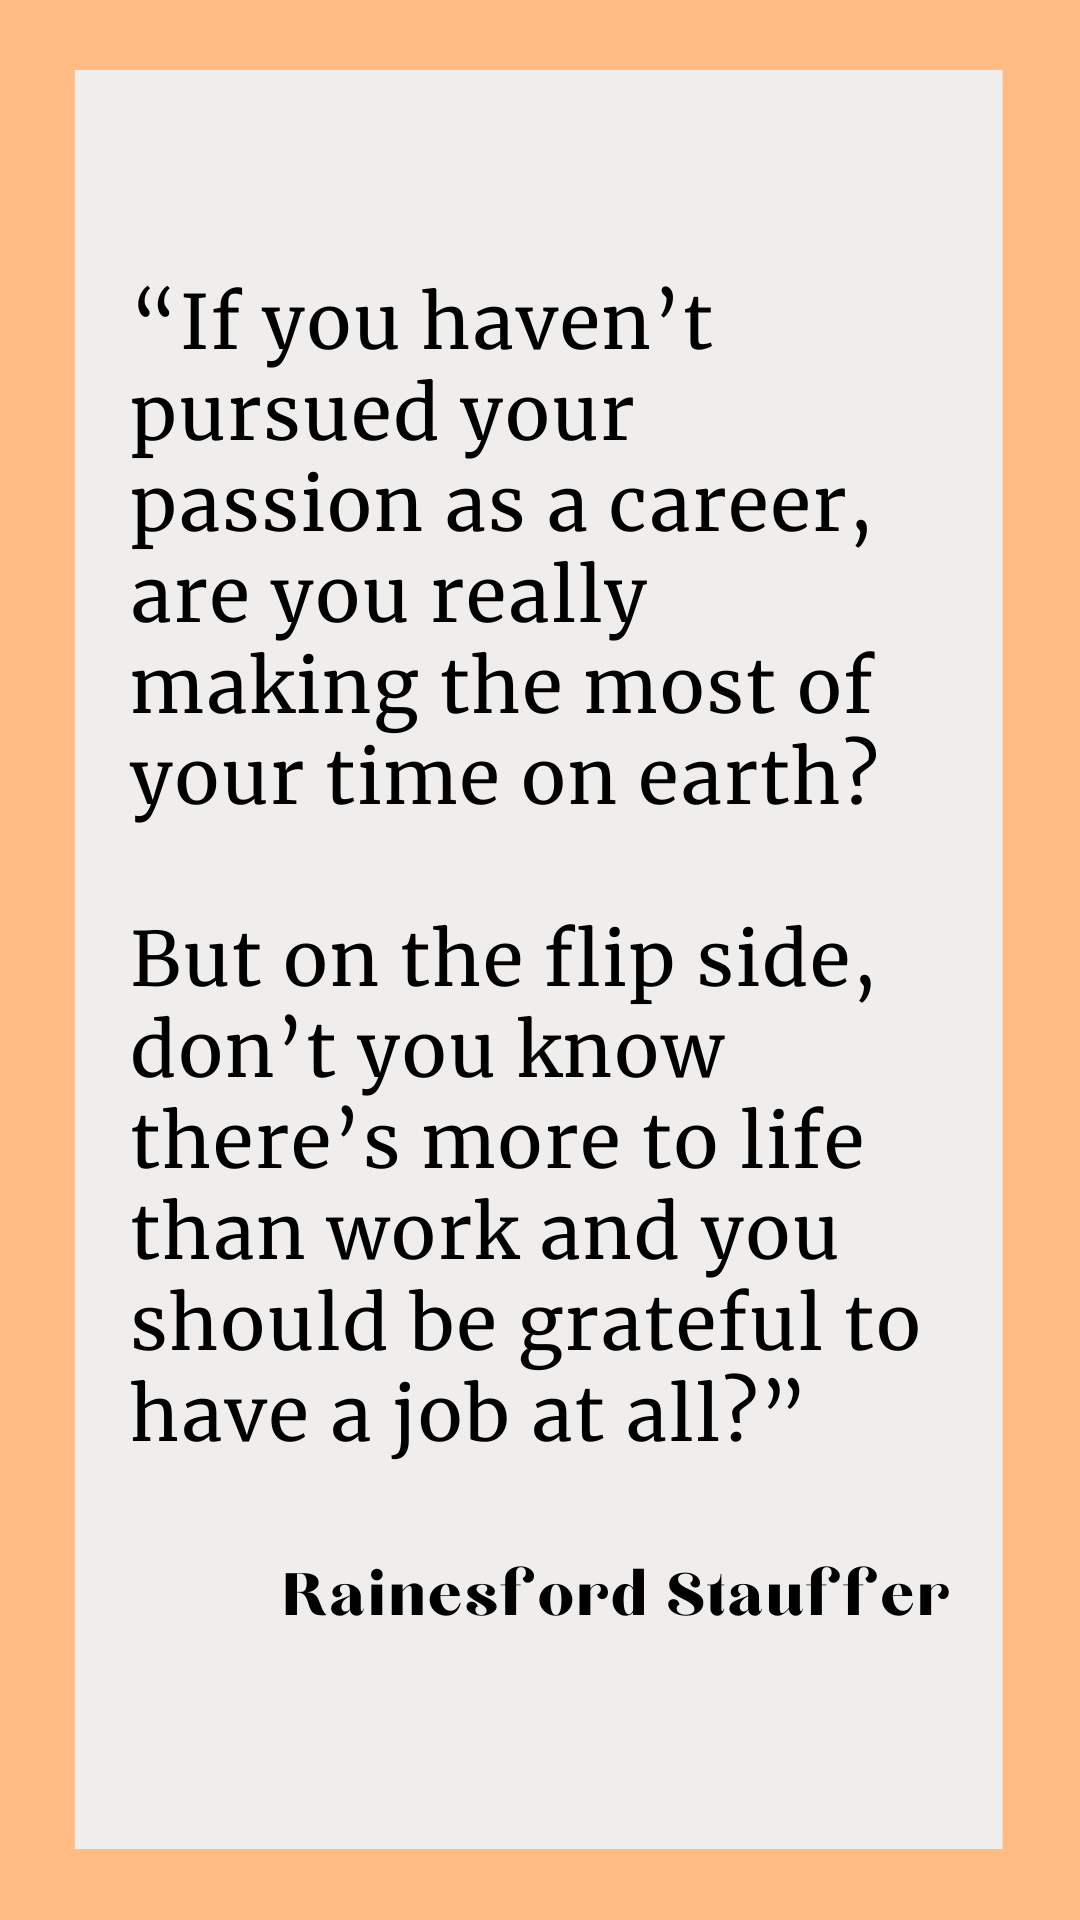 Rainesford Stauffer wonders, “If you haven’t pursued your passion as a career, are you really making the most of your time on earth? But on the flip side, don’t you know there’s more to life than work and you should be grateful to have a job at all?"